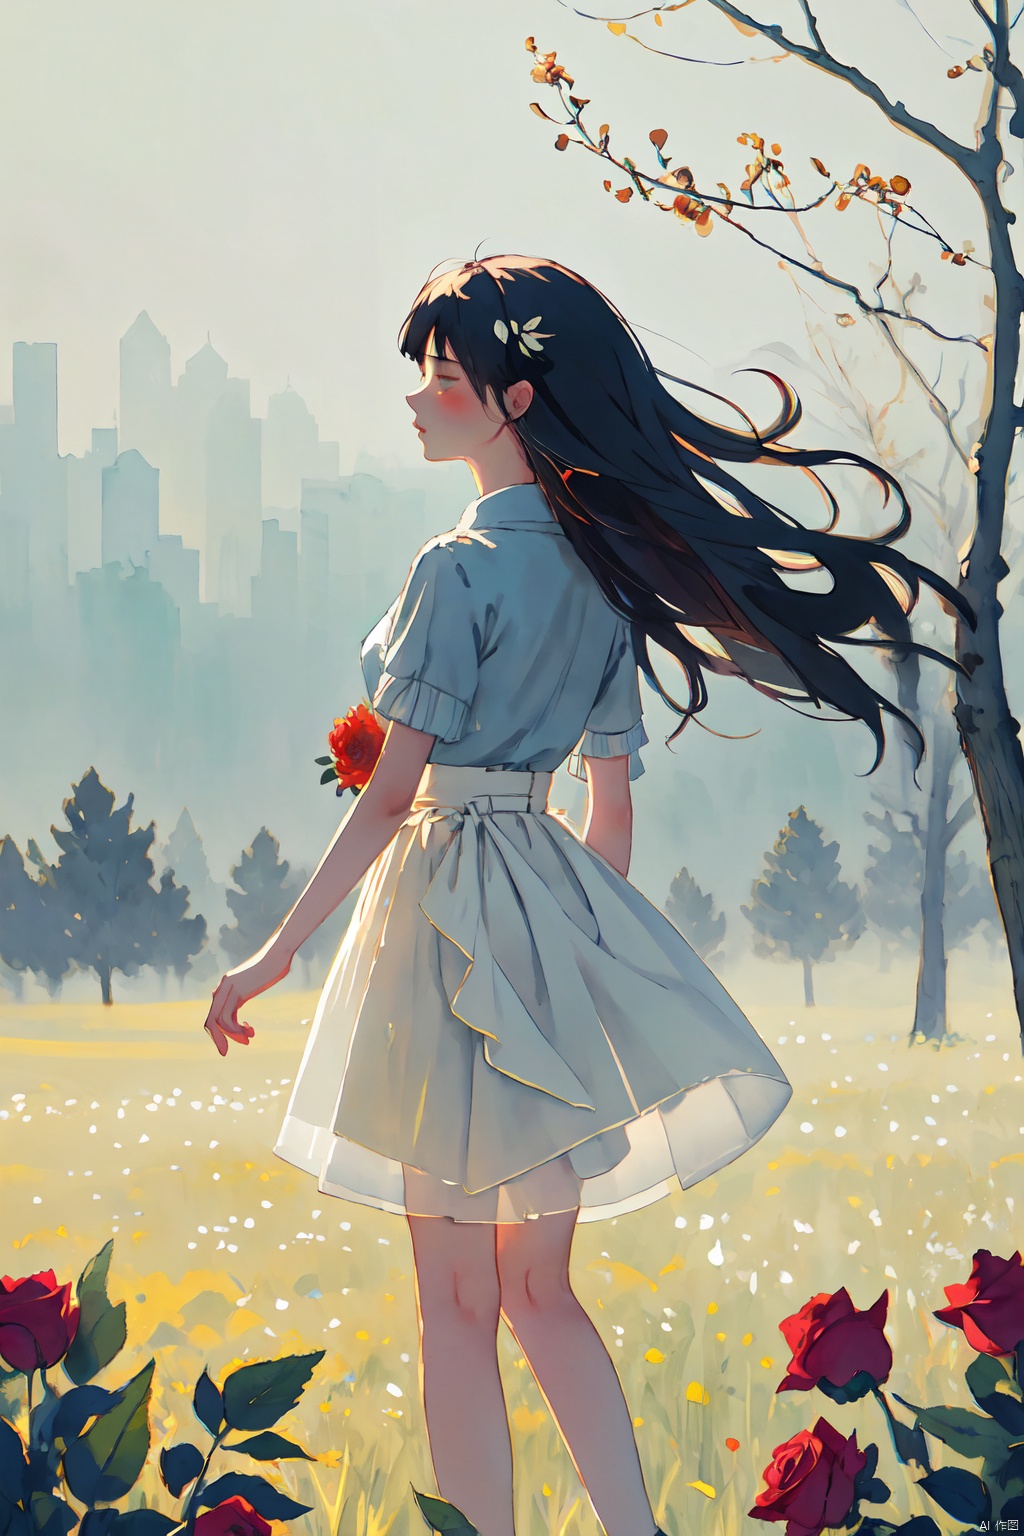  A melancholic autumn scene in a vast flower field,a gentle breeze rustling through the dry grass,fallen leaves scattered among the flowers, a bittersweet atmosphere, a moment of quiet contemplation,1girl,long hair,white_skirt, high-waist_shorts, outfit ,roses,(dynamic angle:1.1),vivid,Soft and warm color palette, delicate brushwork, evocative use of light and shadow, wide shot,subtle details in the wilting flowers,high contrast,color contrast,at night,shadow, CGArt Illustrator, Gauze Skirt, Light master